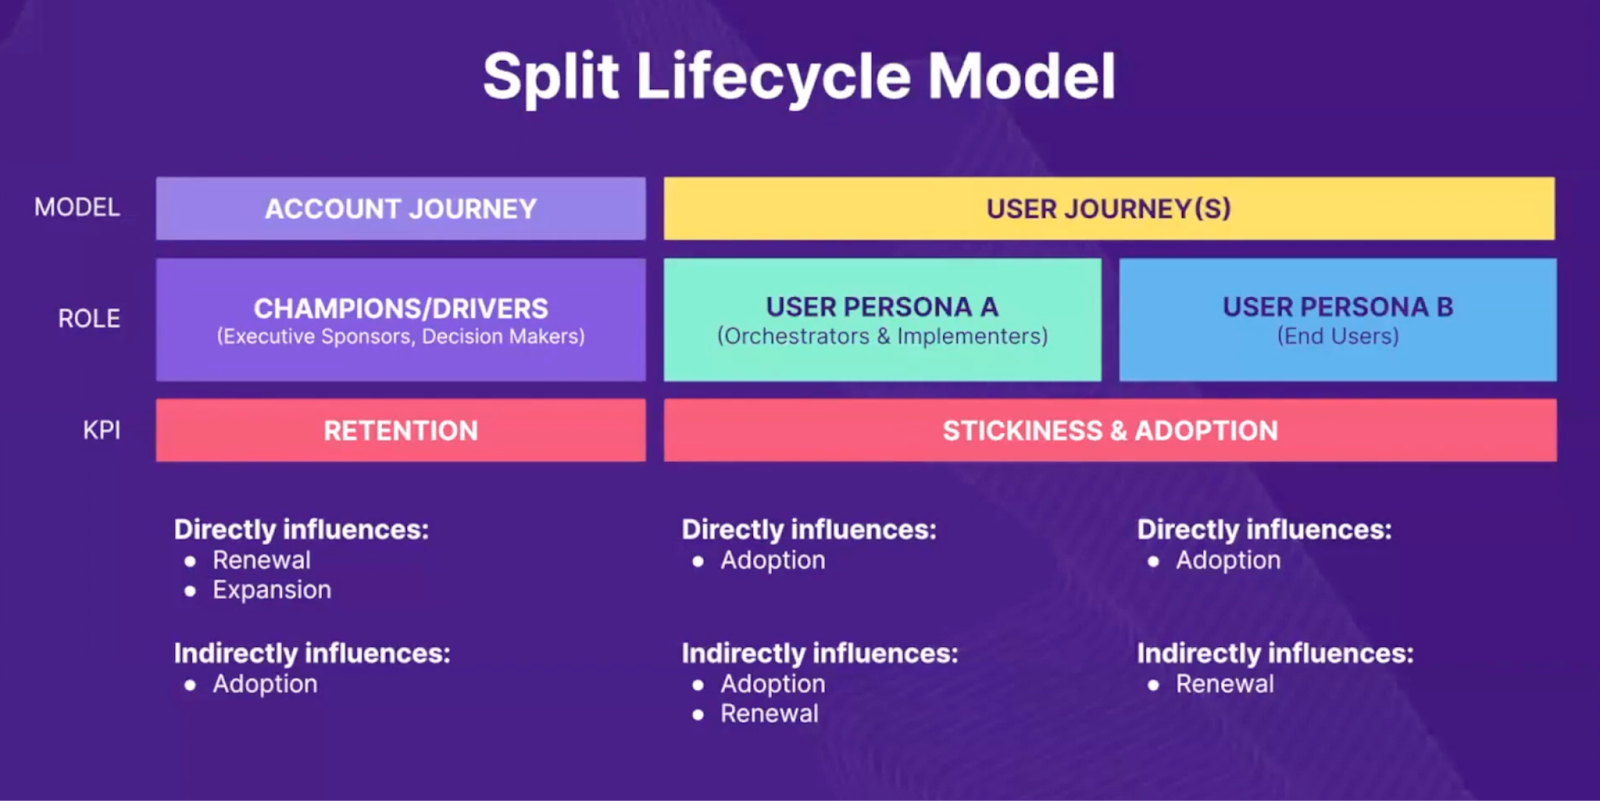 Split Lifecycle Model diagram with two main sections: "ACCOUNT JOURNEY" with role "CHAMPIONS/DRIVERS" focusing on KPI "RETENTION," influencing "Renewal" and "Expansion" directly and "Adoption" indirectly. "USER JOURNEY(S)" split into "USER PERSONA A," orchestrators, with KPI "STICKINESS & ADOPTION," influencing "Adoption" both directly and indirectly, and "Renewal" indirectly. "USER PERSONA B," end users, with KPI "ADOPTION," directly affects "Adoption" and indirectly "Renewal."